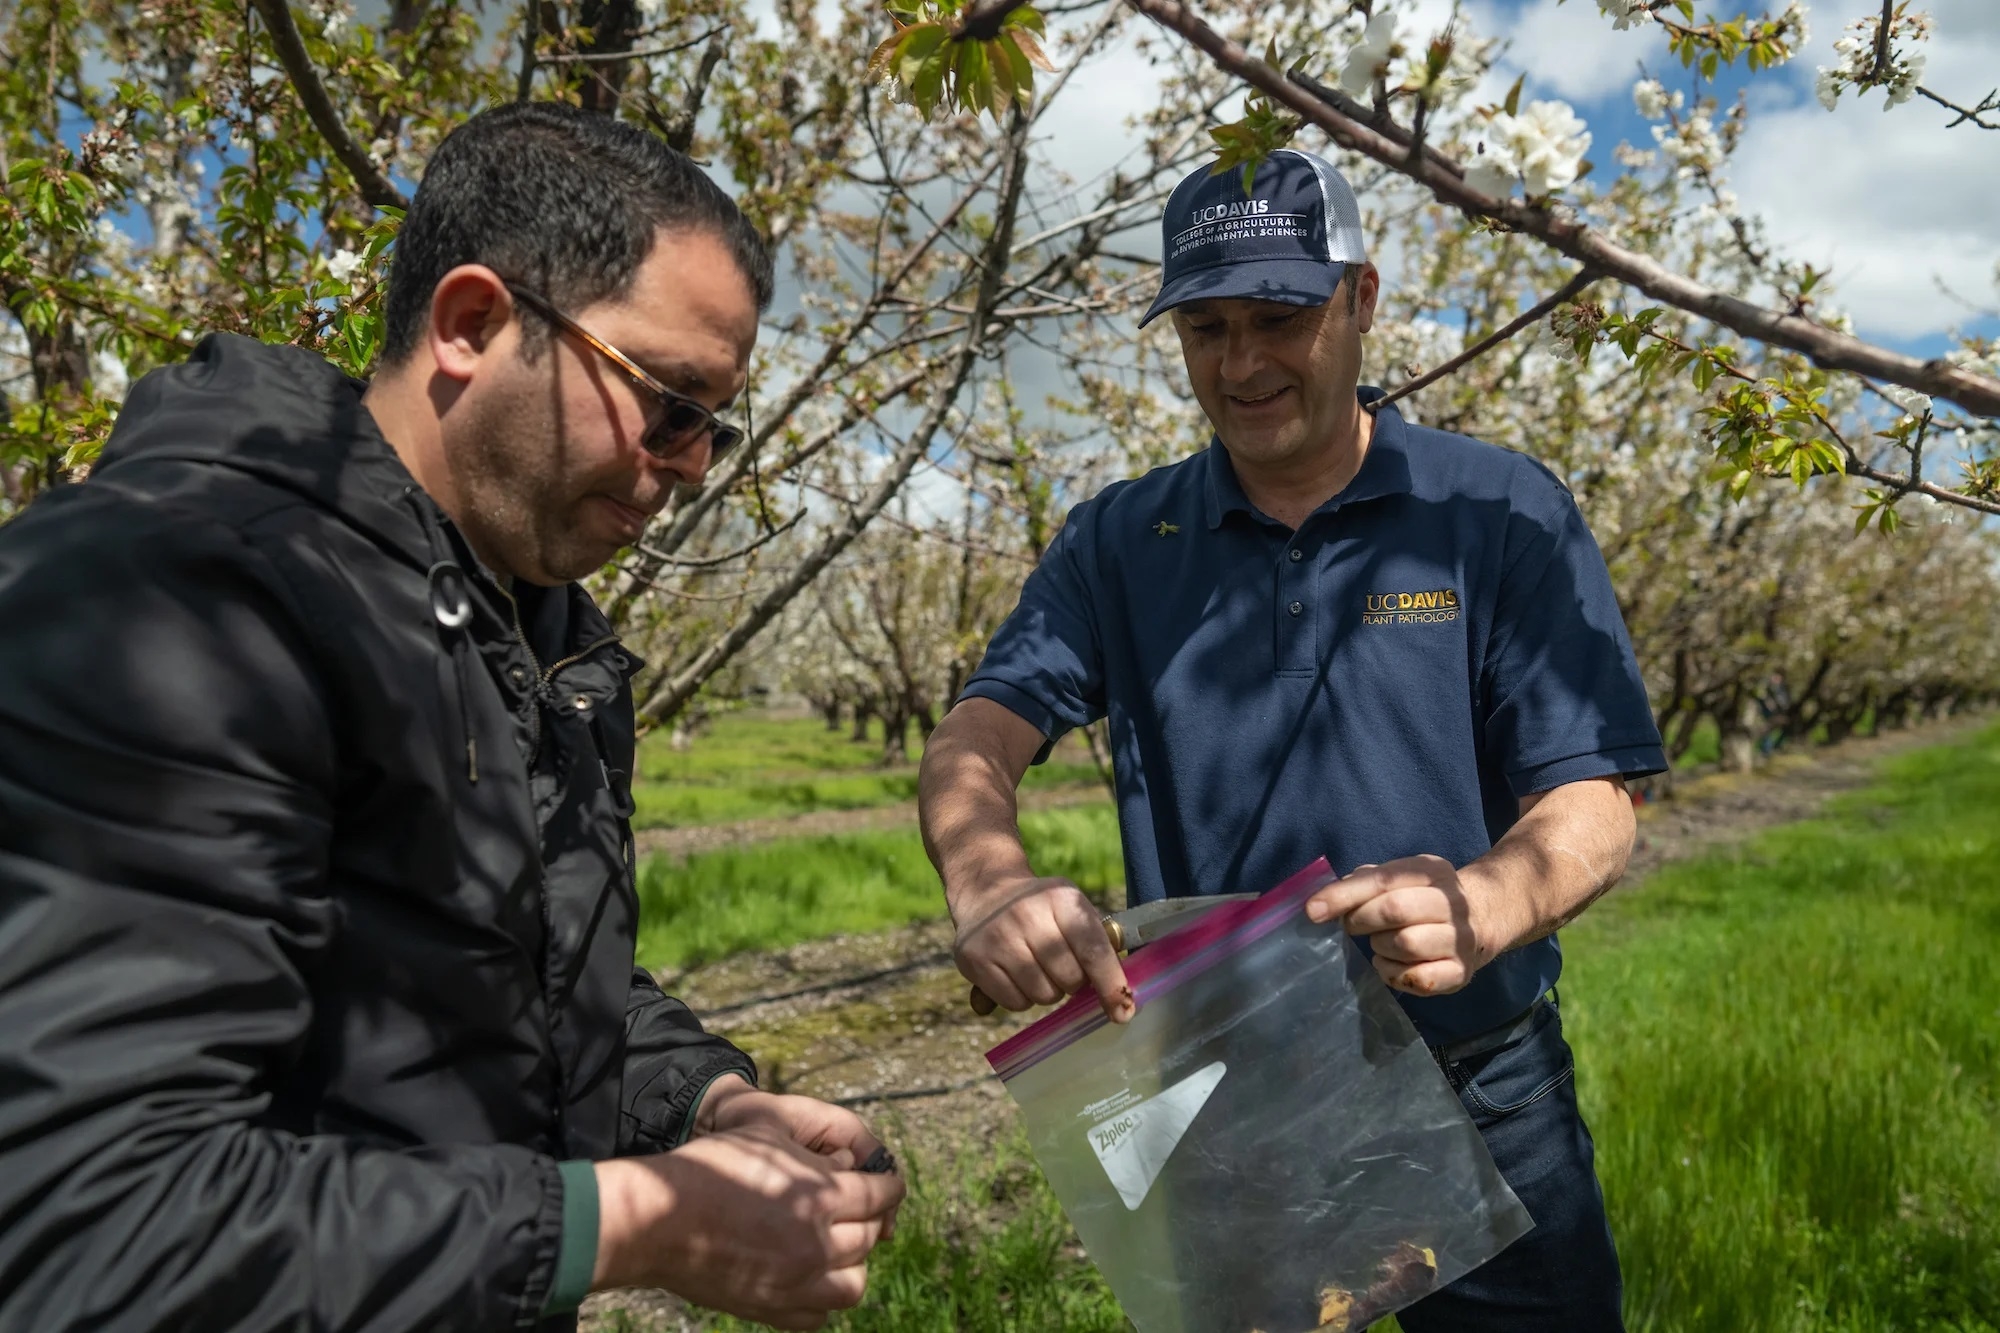 Winter atmospheric rivers gave pathogens and diseases the path to infect crops